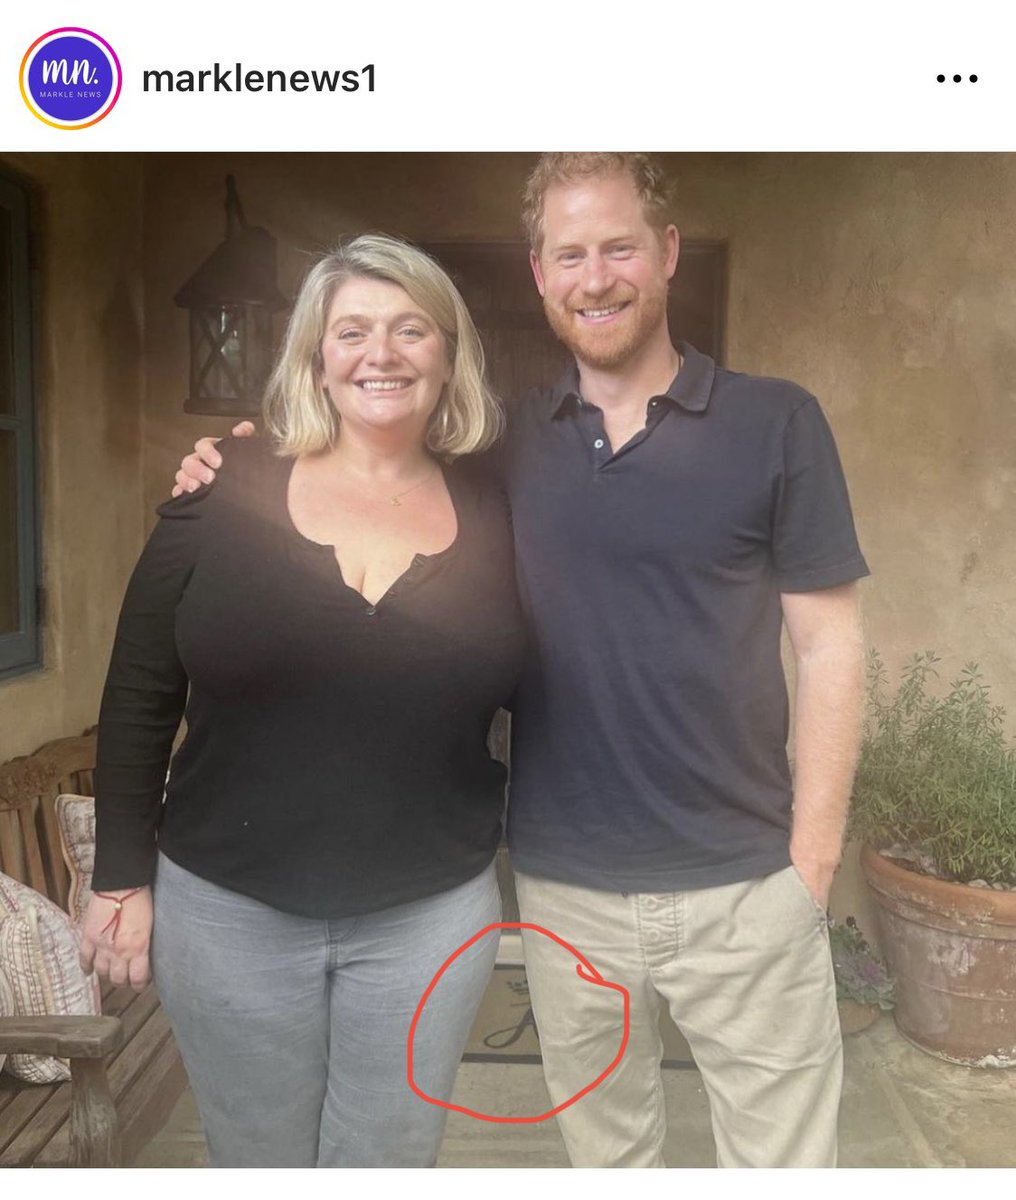 Oh dear. Didn’t Wallis and Edward, The Duke and Duchess of Windsor also have their royal monograms on everything including the rubbish bin? 😬🤣🤣🤣🤦🏻‍♀️ 

#PrinceHarry #PrinceHarryInterview #PrinceHarryExposed